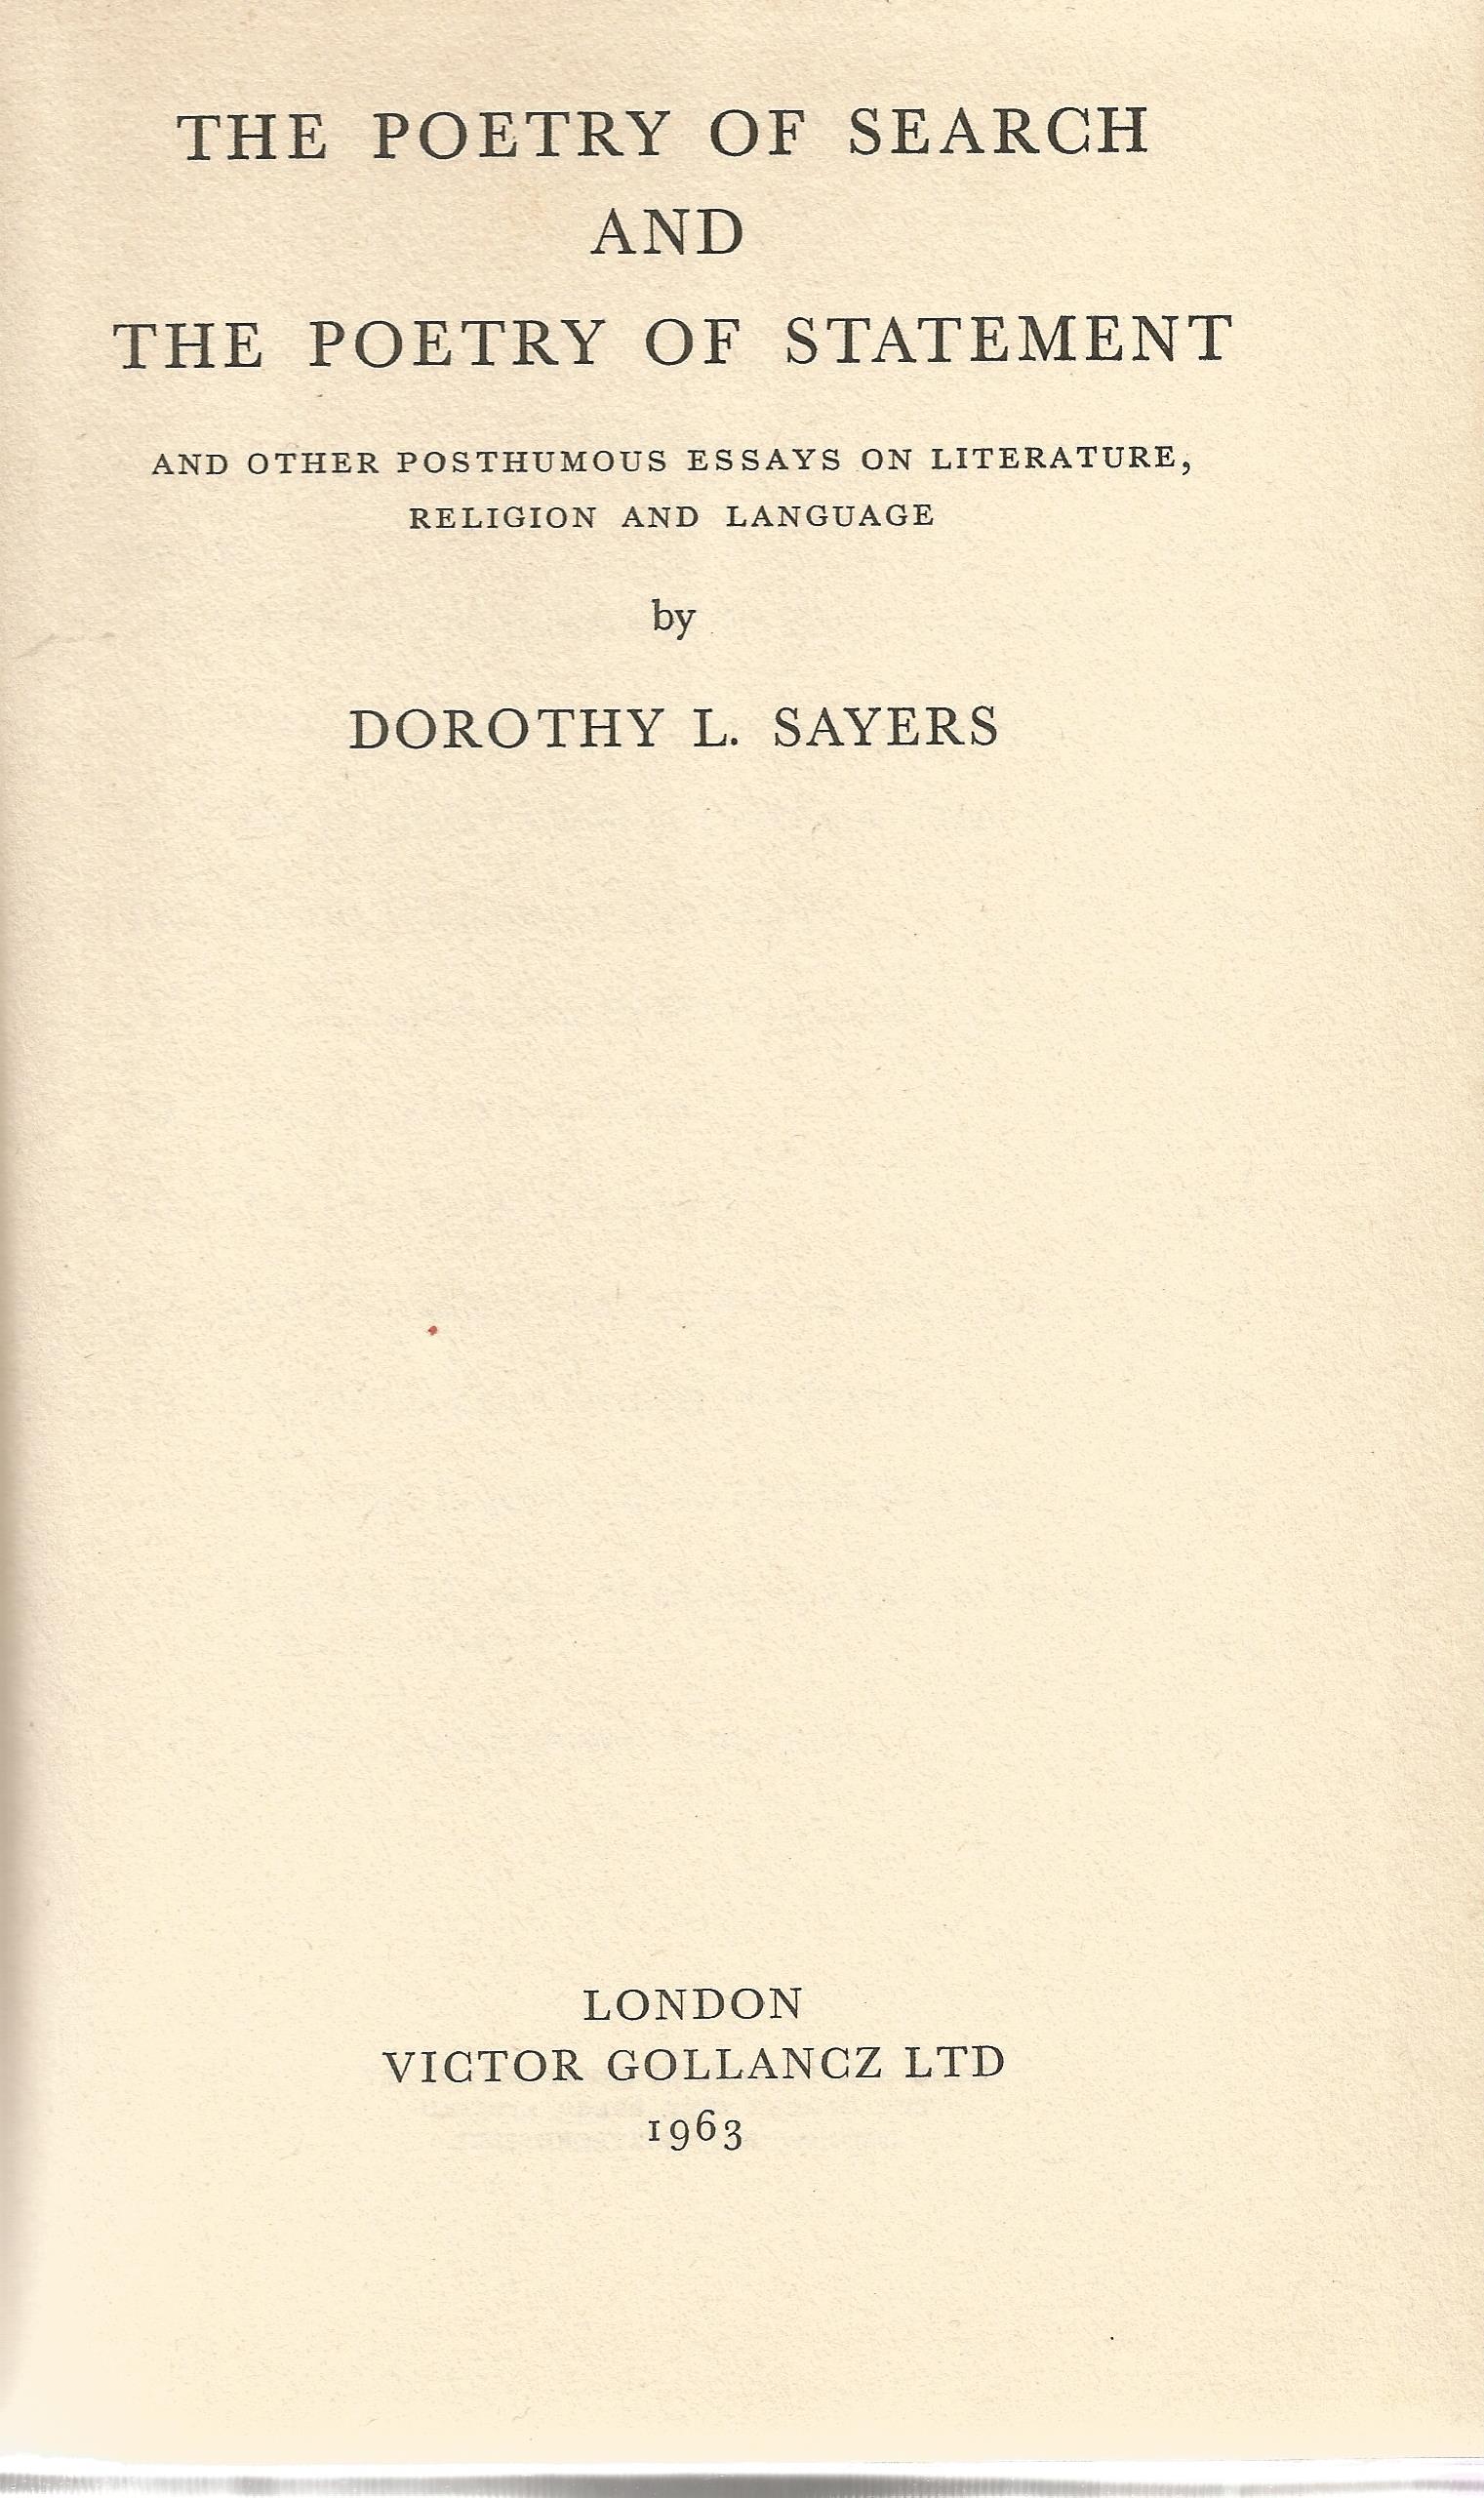 The Poetry of Search and The Poetry of Statement by Dorothy L Sayers 1963 Hardback Book First - Image 2 of 3